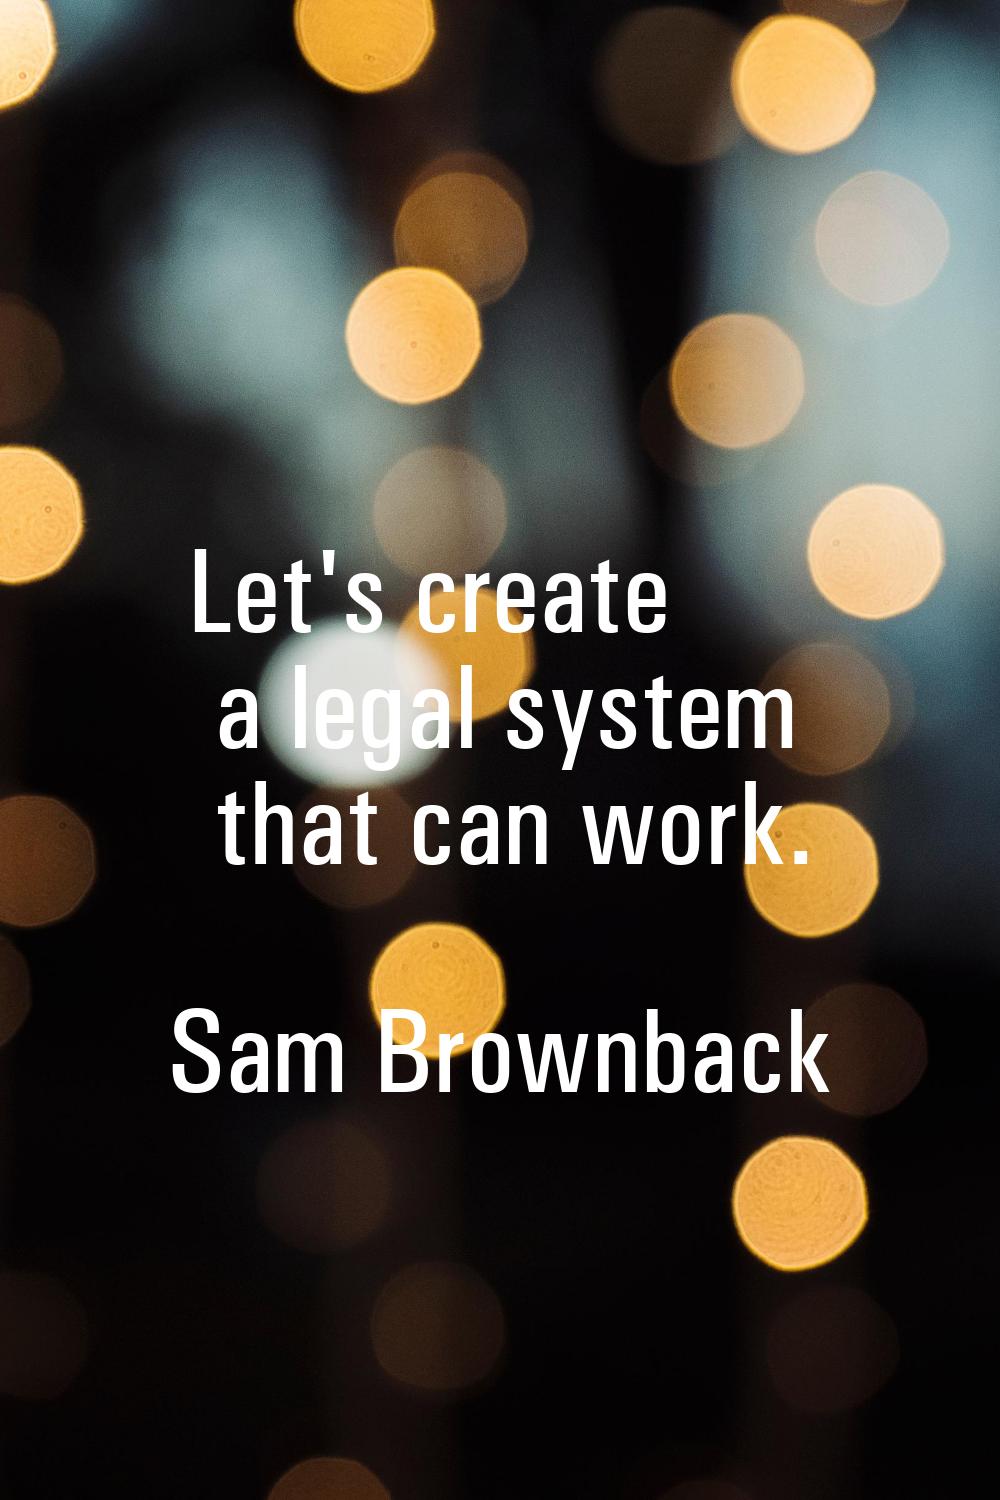 Let's create a legal system that can work.